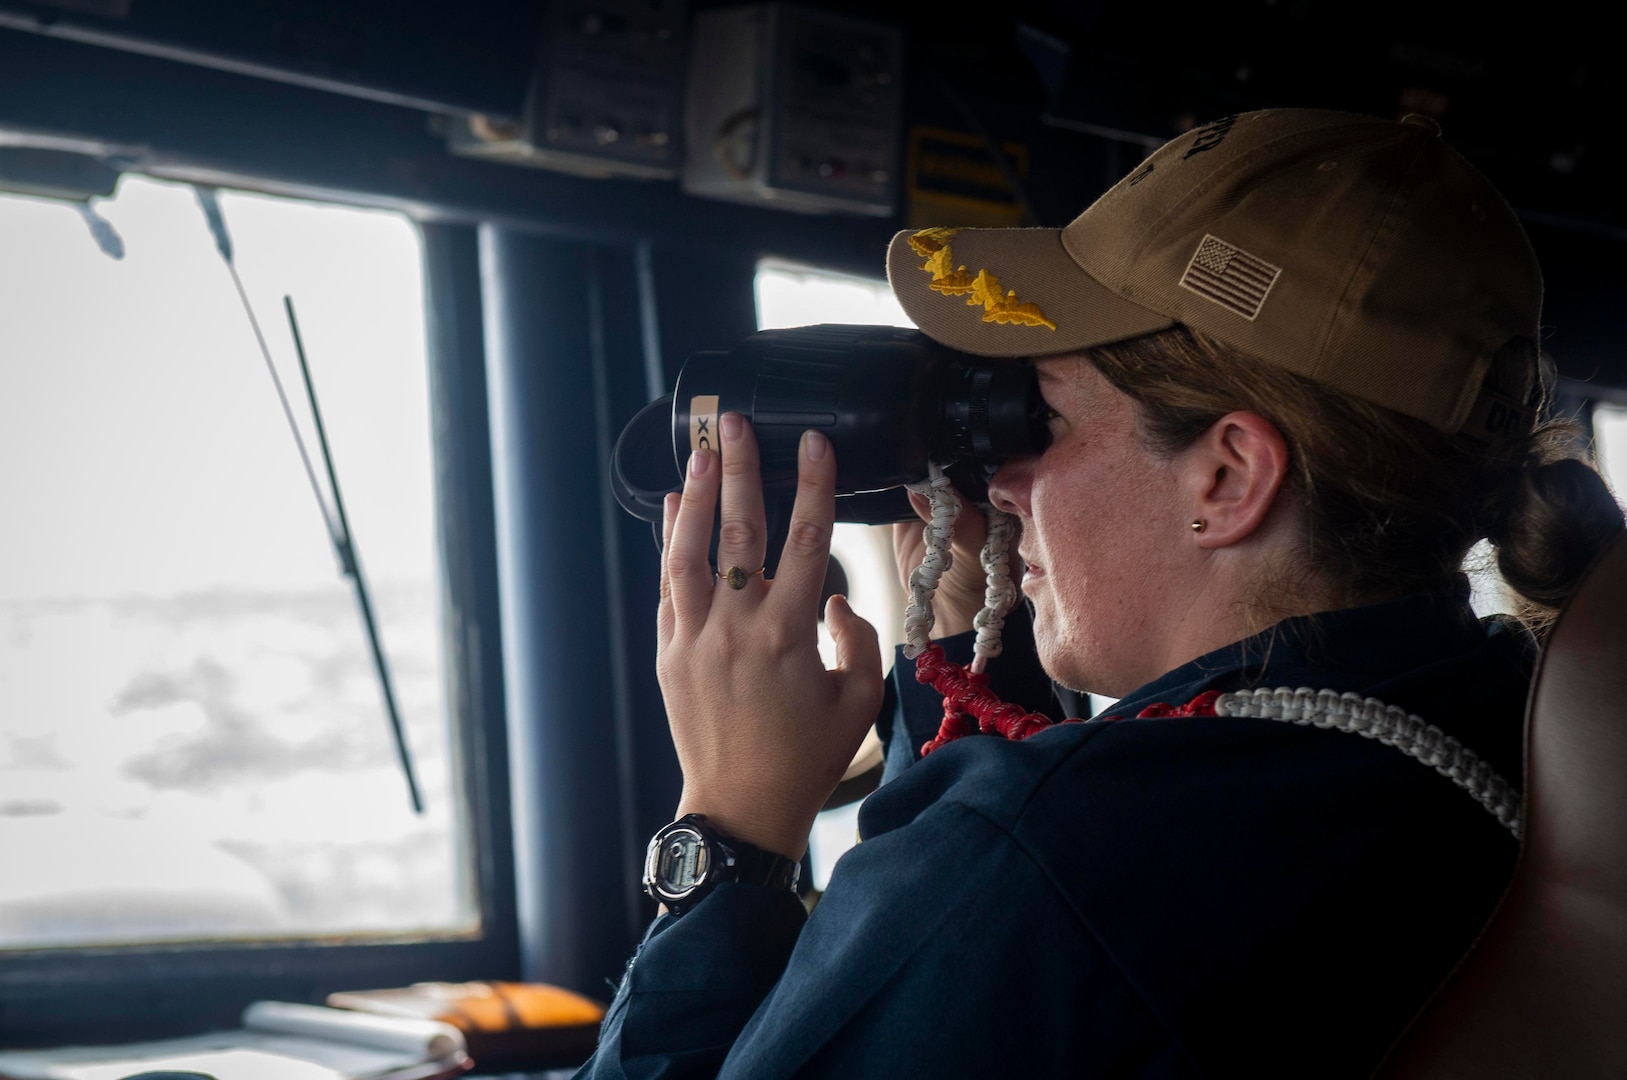 231125-N-EE352-2073

SOUTH CHINA SEA (Nov. 25, 2023) – Cmdr. Andrea Benvenuto, executive officer of the Arleigh Burke-class guided-missile destroyer USS Hopper (DDG 70), observes from the bridge aboard Hopper while conducting routine underway operations. Hopper is forward-deployed to the U.S. 7th Fleet area of operations in support of a free and open Indo-Pacific. (U.S. Navy photo by Mass Communication Specialist 2nd Class Leon Vonguyen)